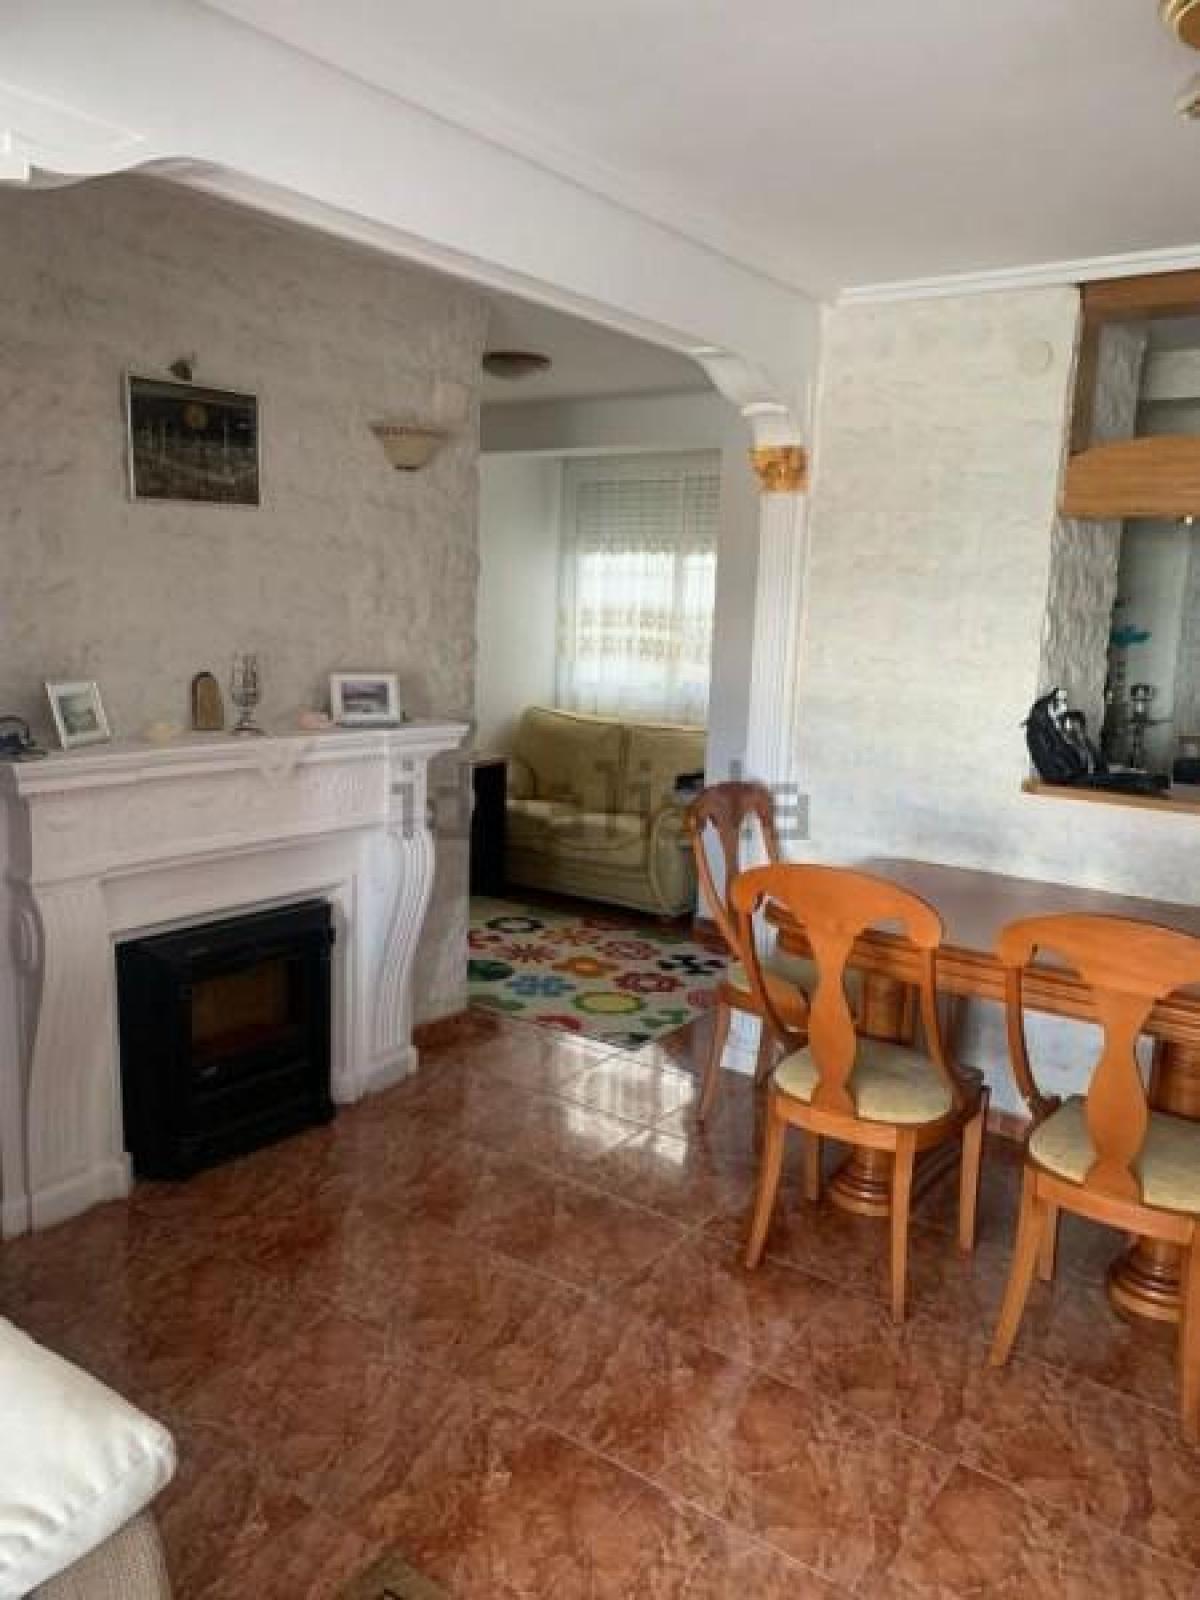 Picture of Apartment For Sale in Paterna, Valencia, Spain